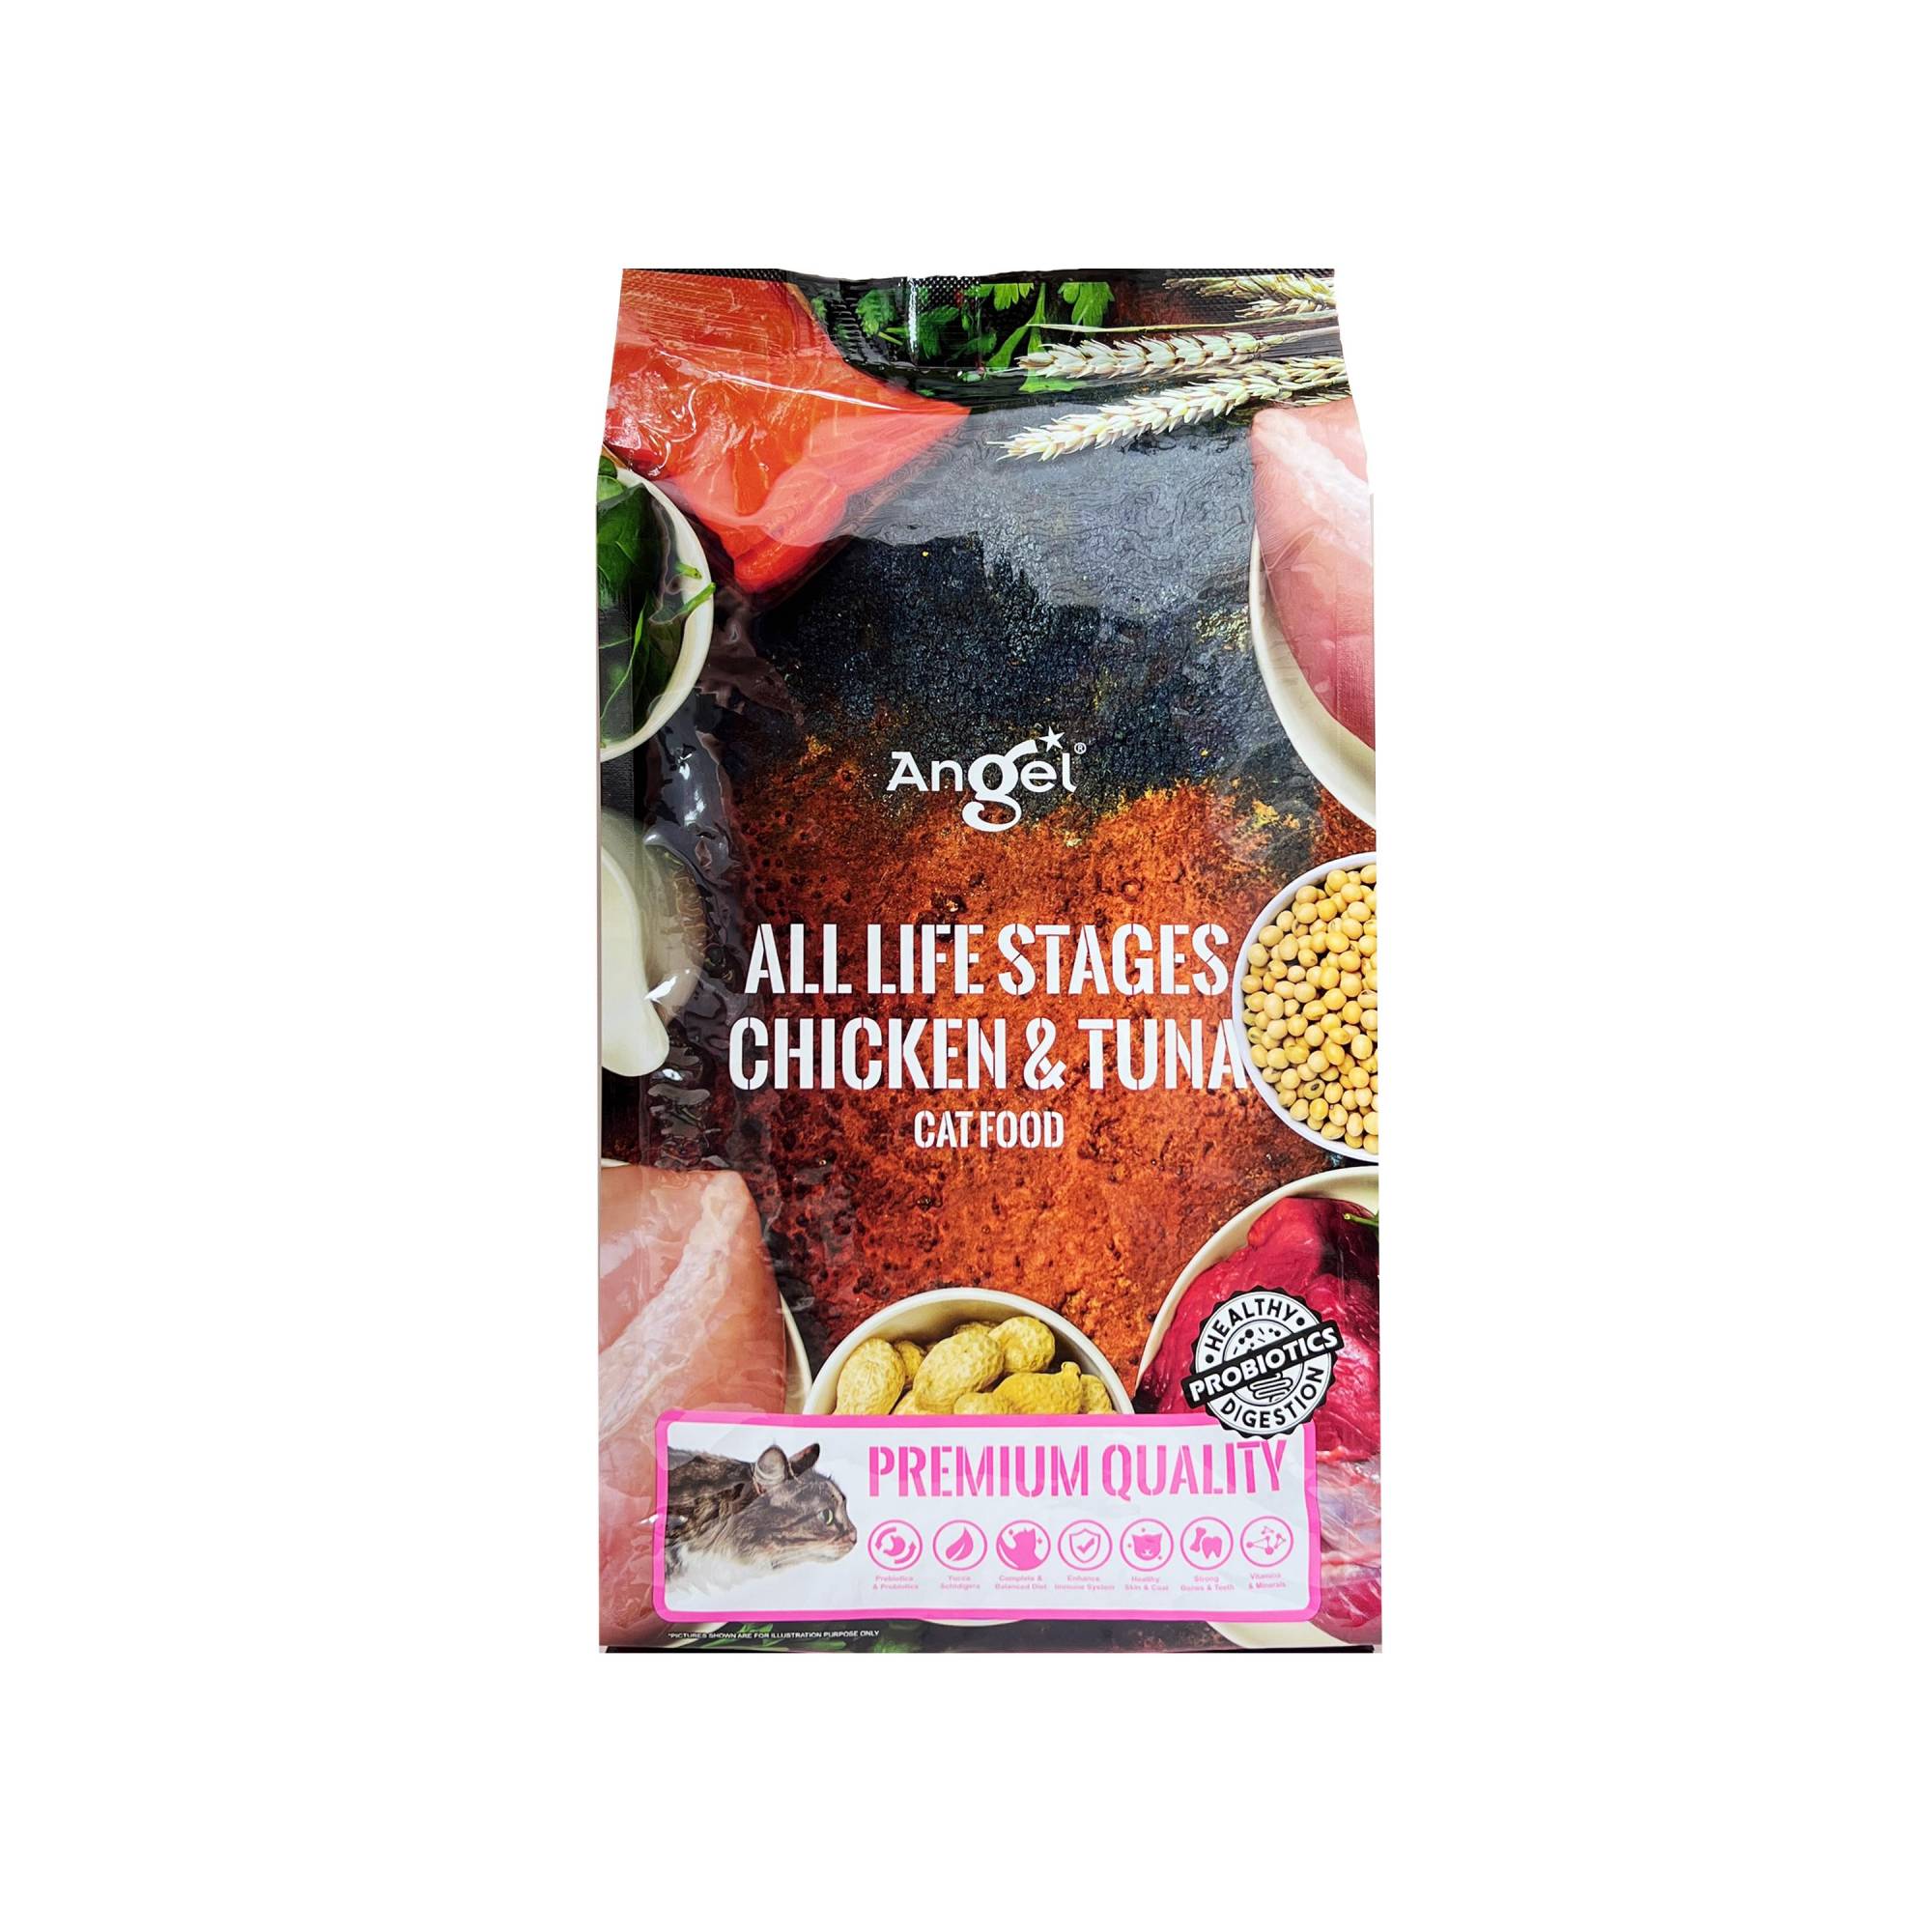 Angel - All Life Stages - Chicken and Tuna 1.1kg